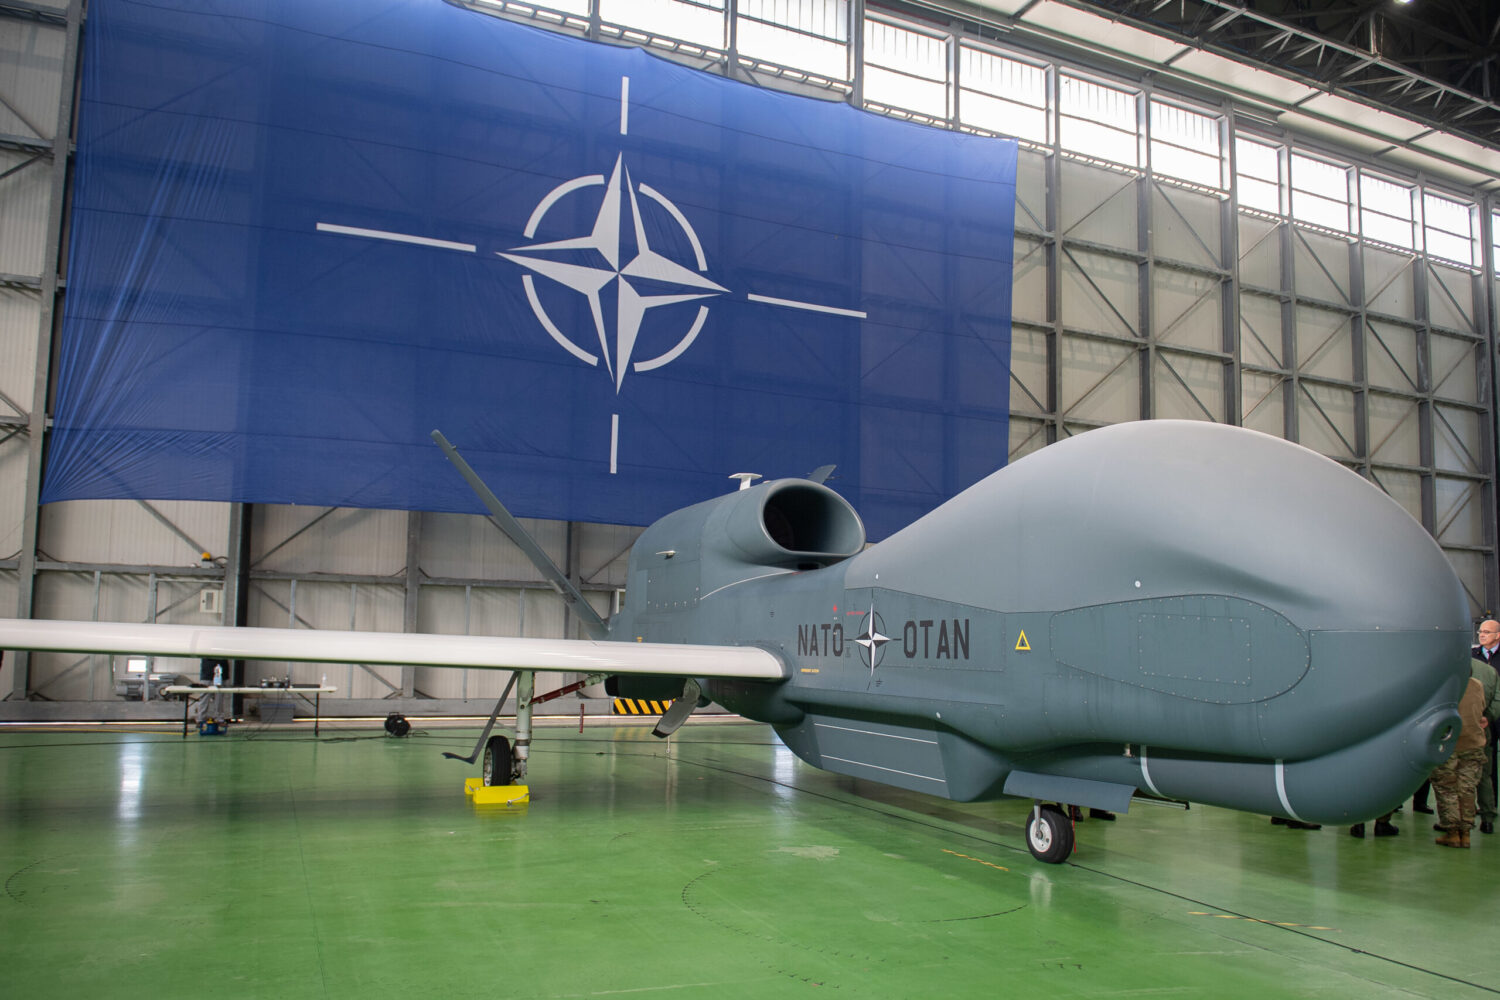 The Bundeswehr flies the world’s largest drones over the Black Sea. When will the first one crash?